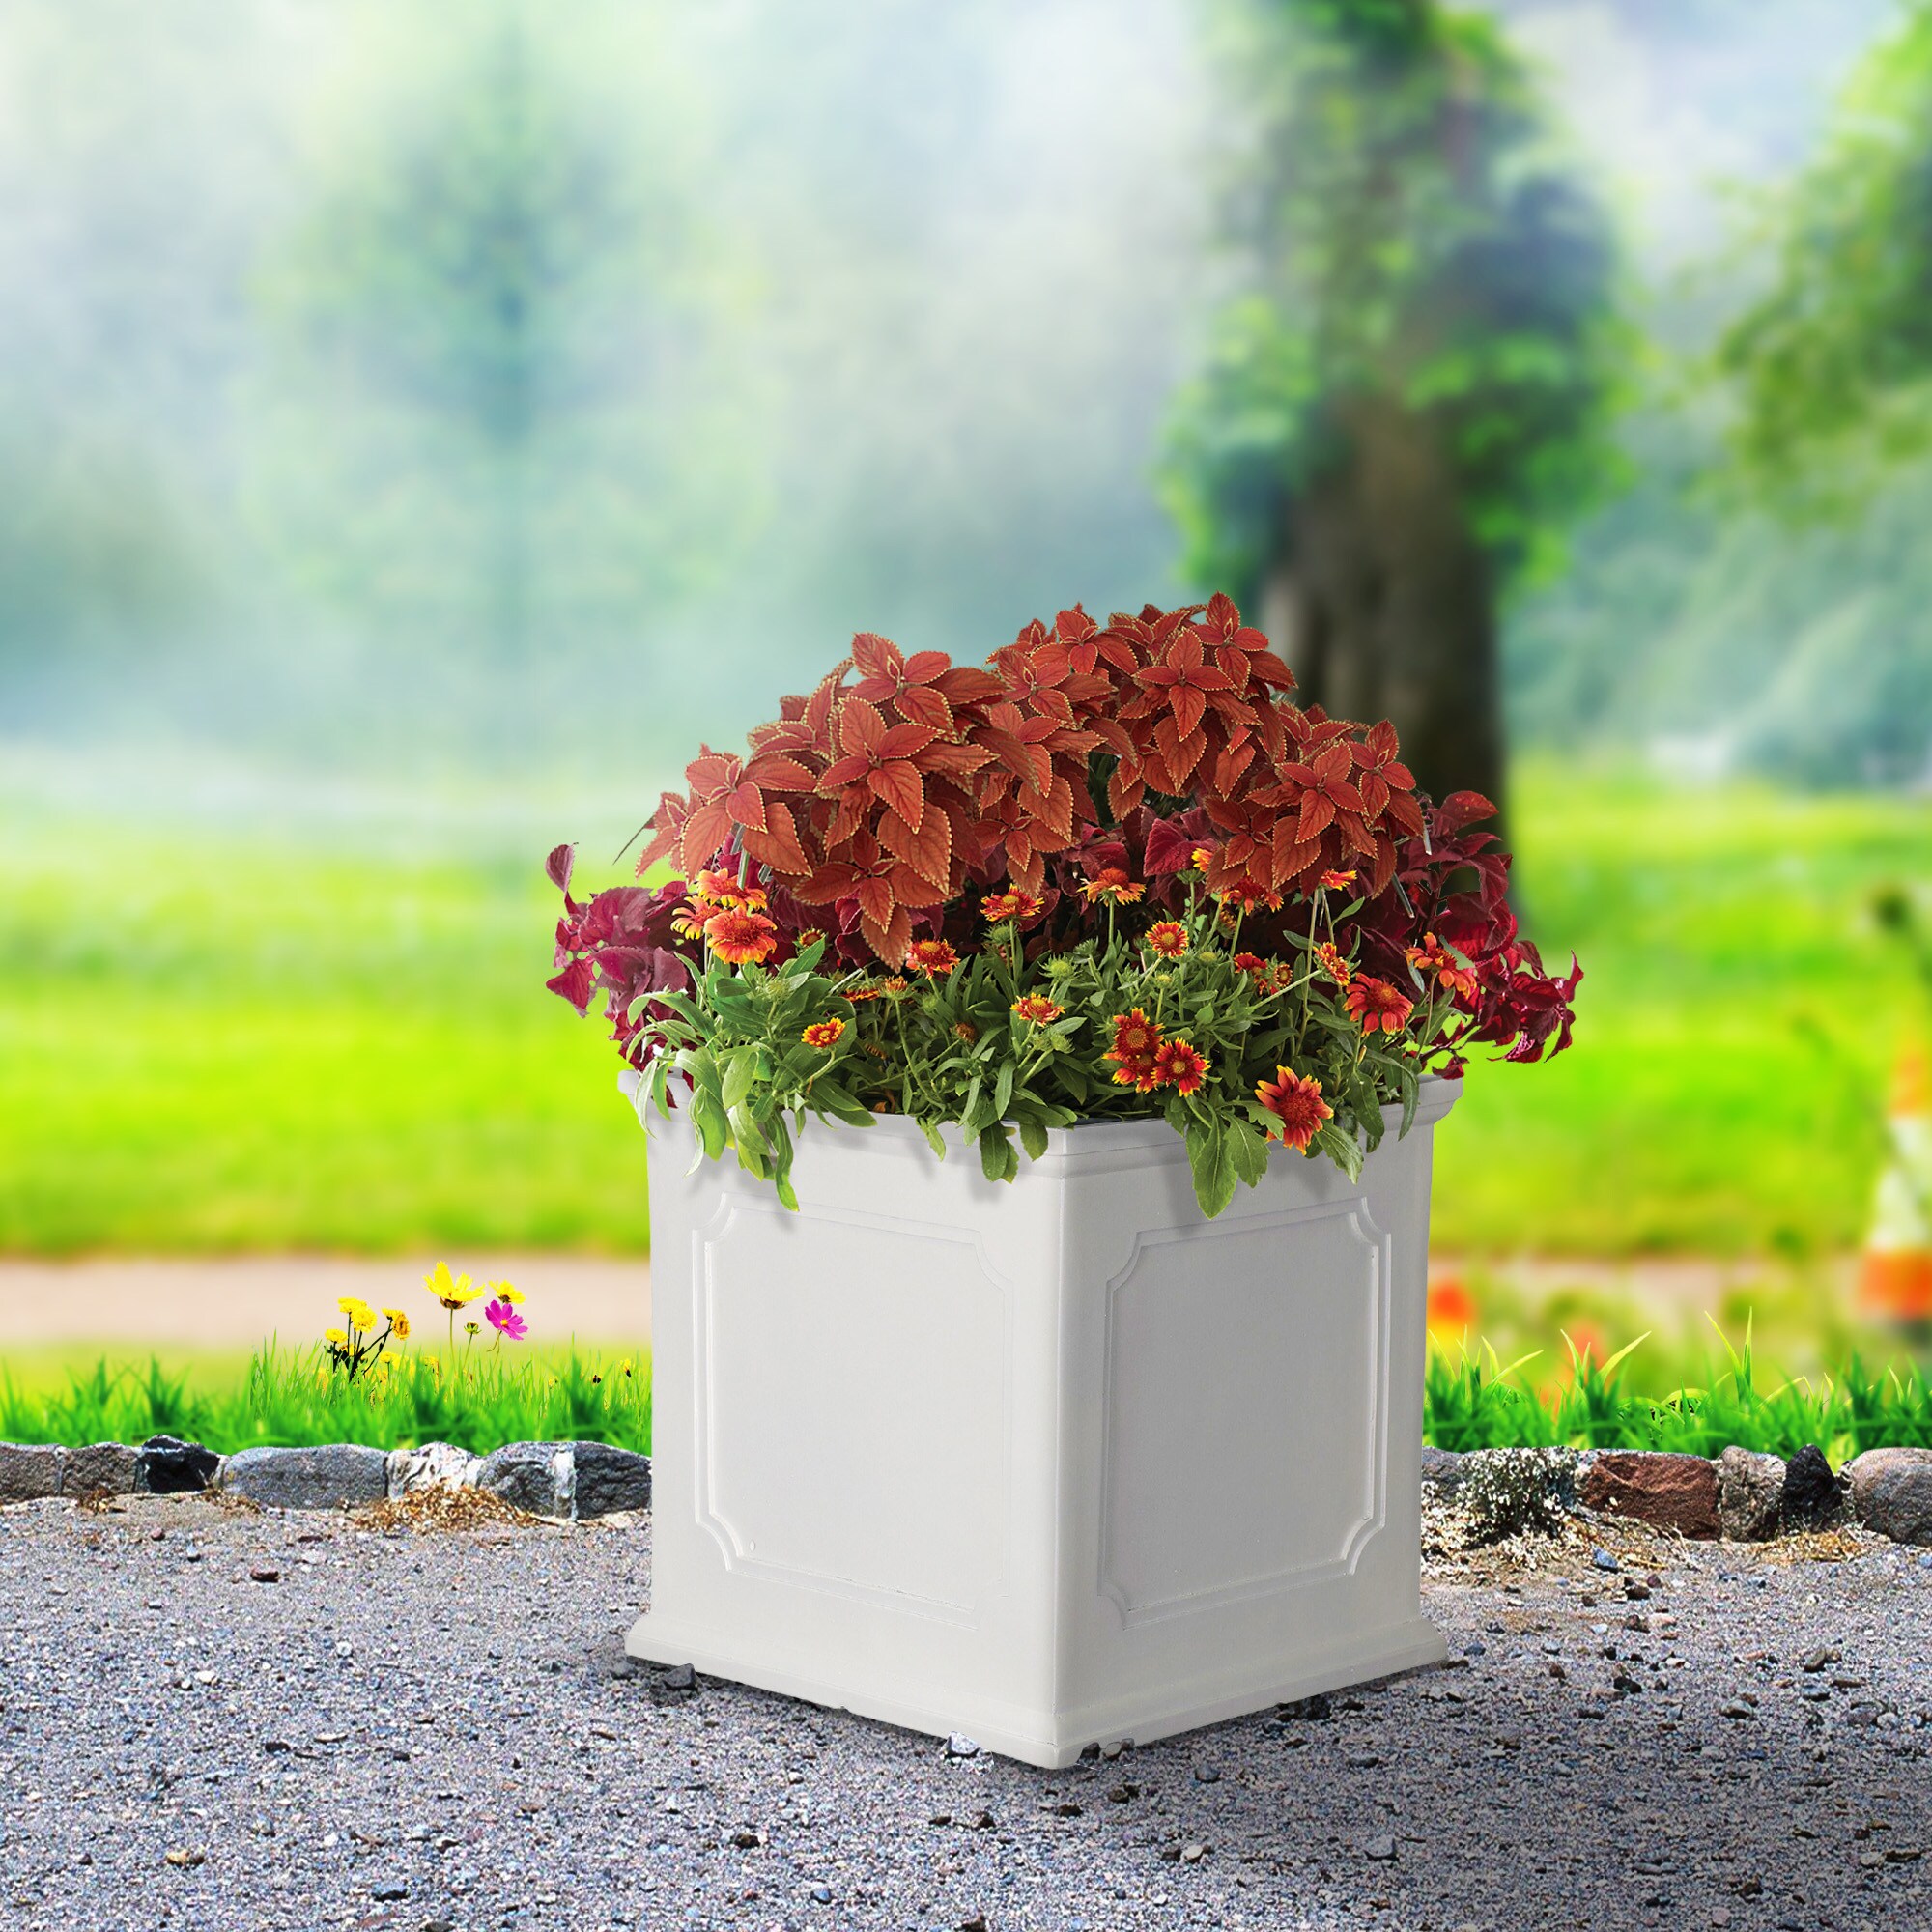 allen + roth 14.02-in W x 14.9-in H White Resin Contemporary/Modern Indoor/Outdoor Planter in Pots & Planters department at Lowes.com